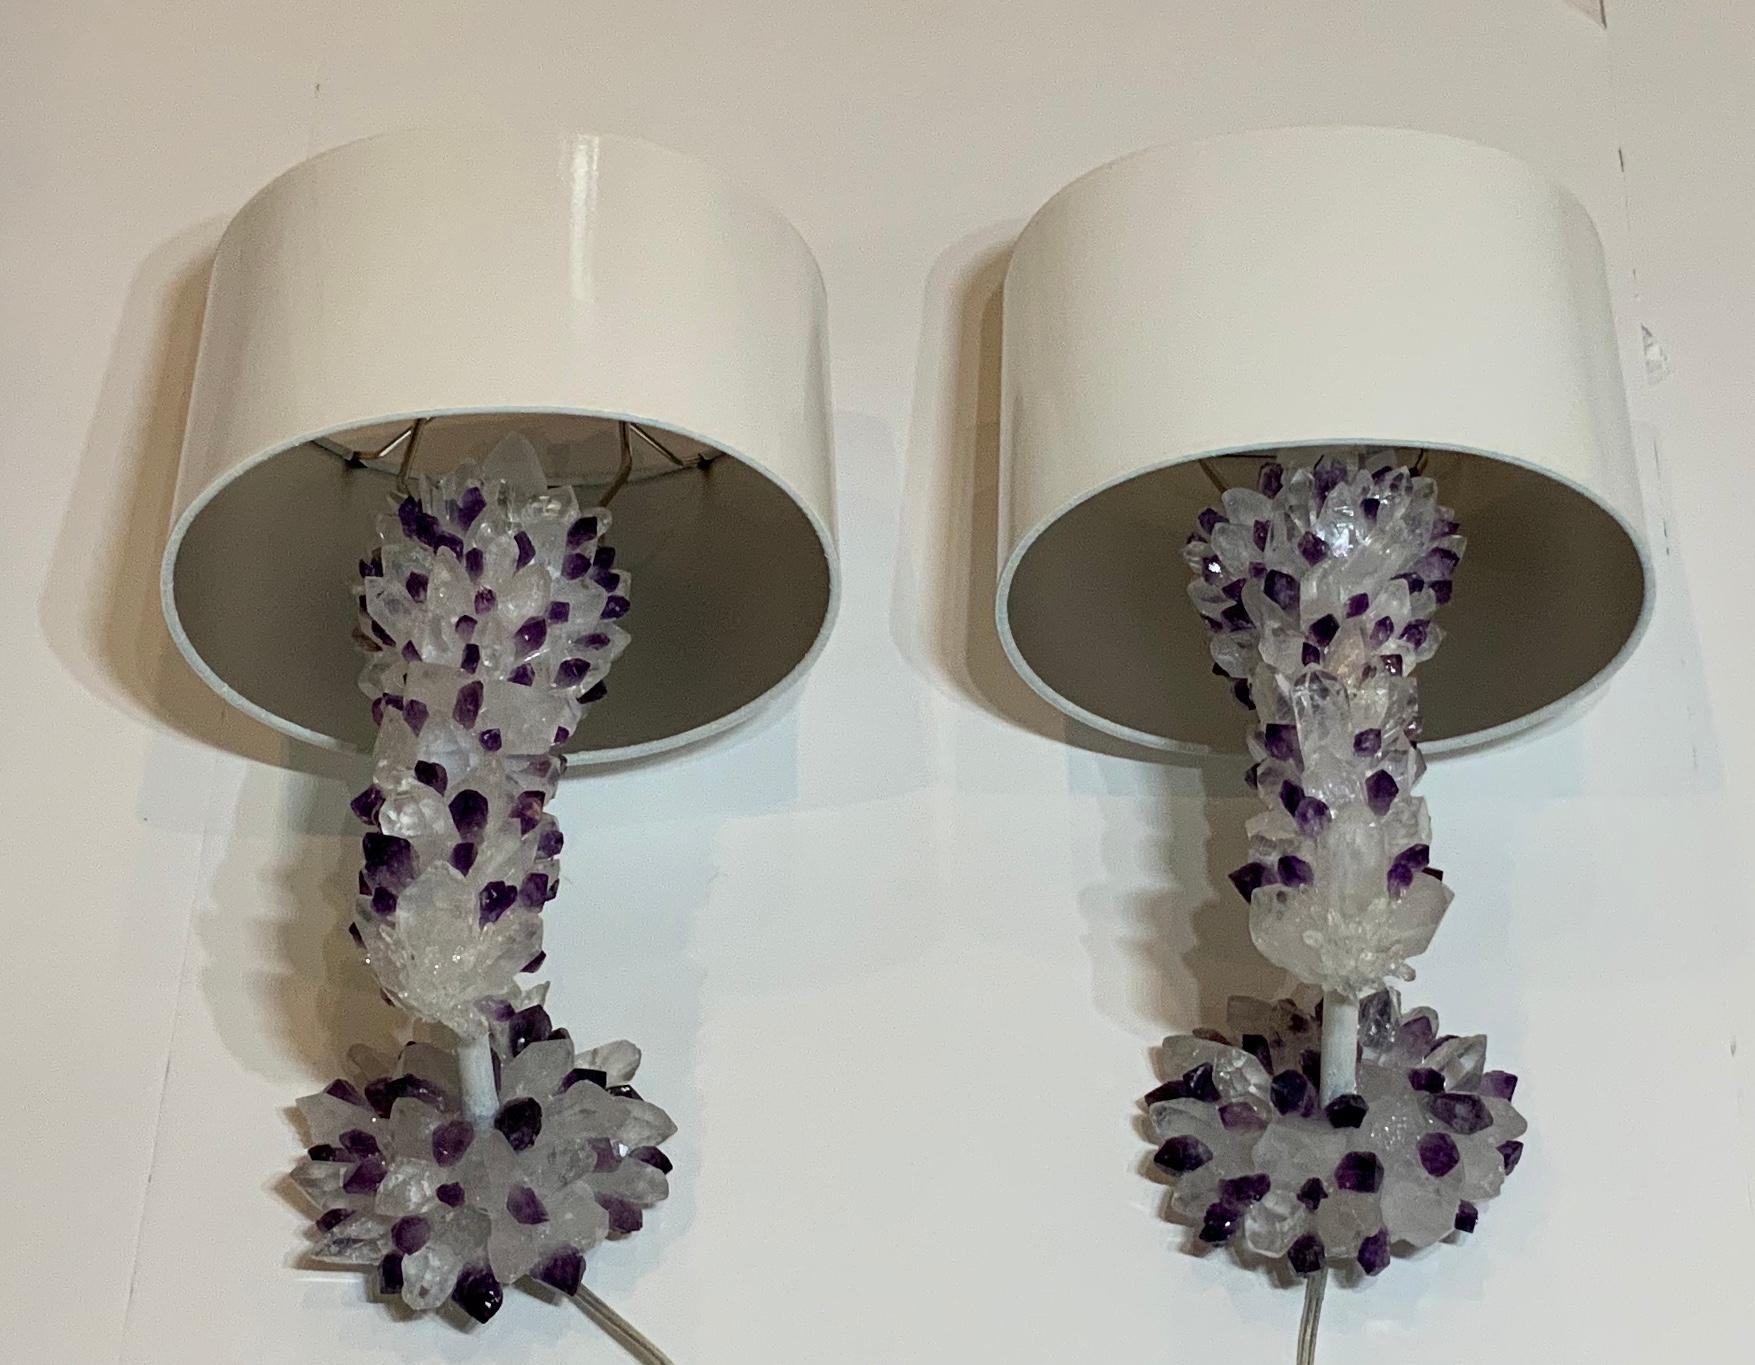 Exceptional pair of wall sconces artistically made of small real amethyst stone embedded together with white and clear crystal point
To made a beautiful one of a kind wall sconces, includes two custom
Made shades and two amethyst top